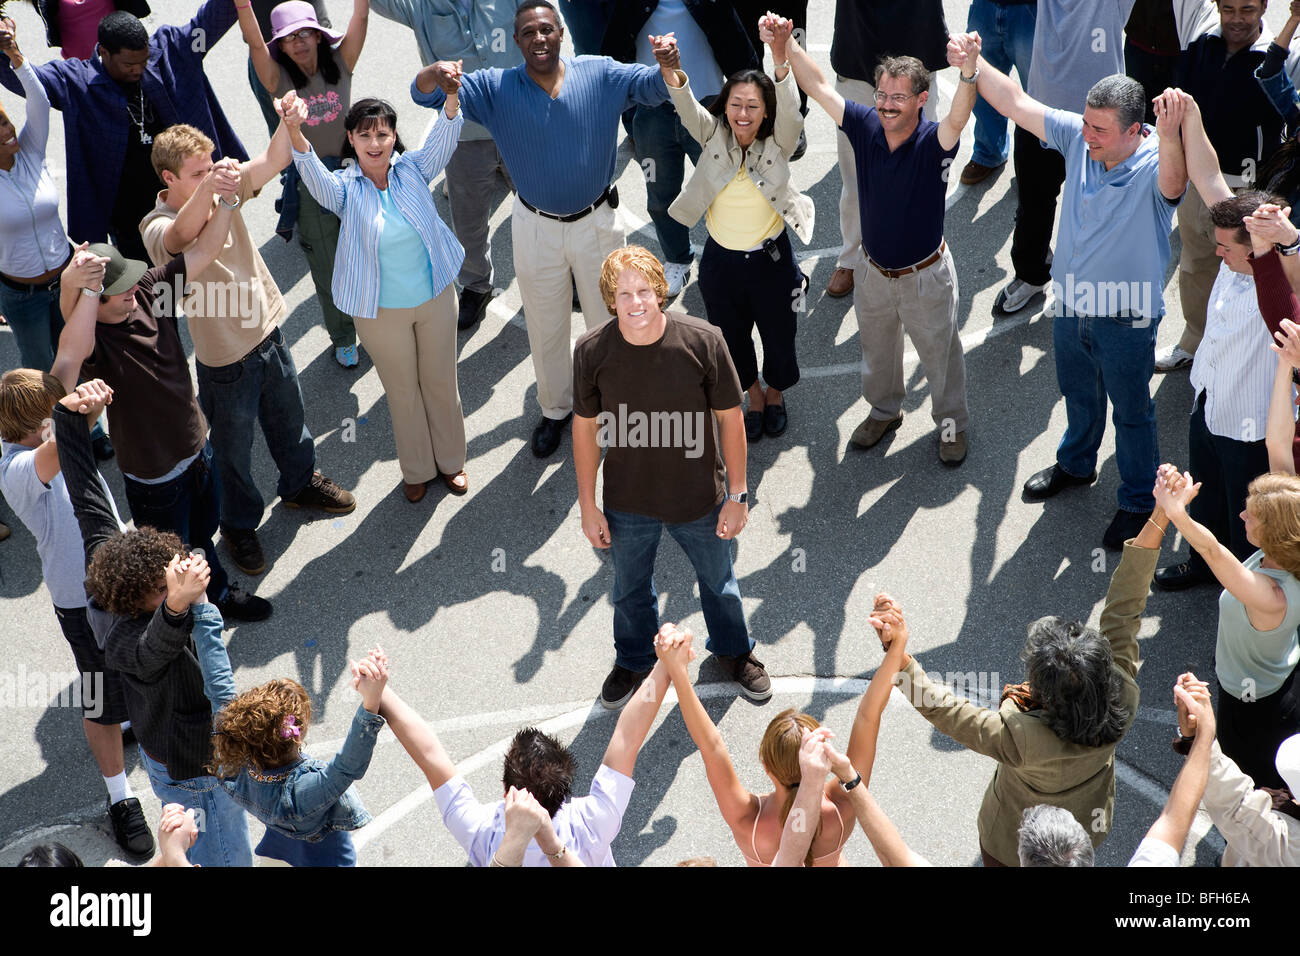 Crowd with arms raised surrounding young man Stock Photo